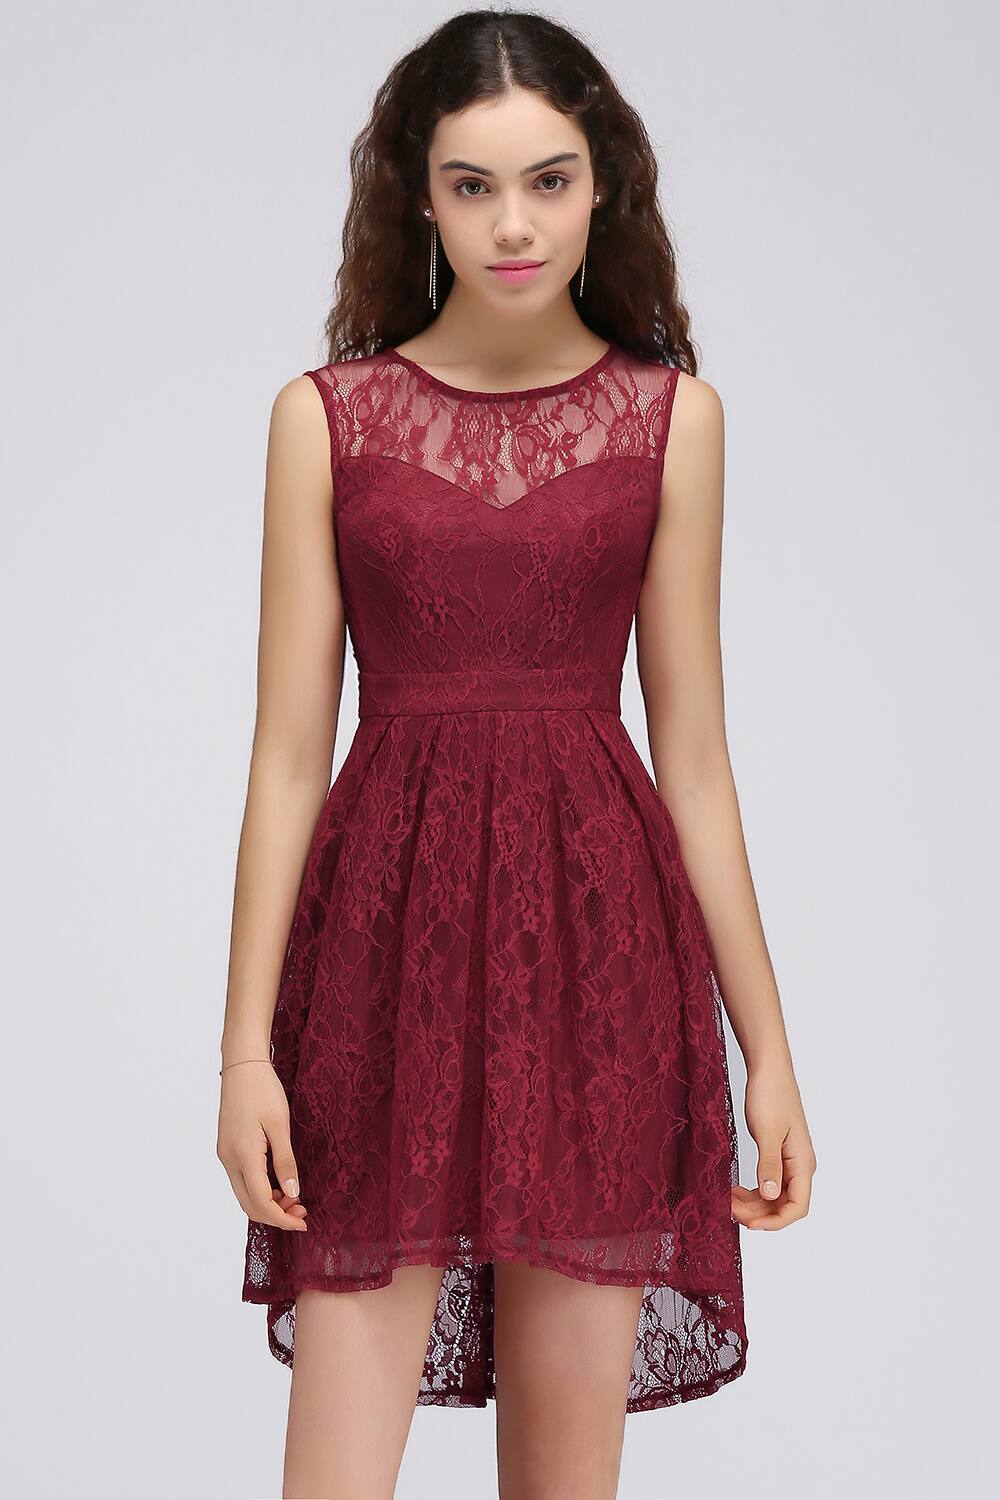 4 styles of Burgundy Dresses $19.90 (each) + Free shipping